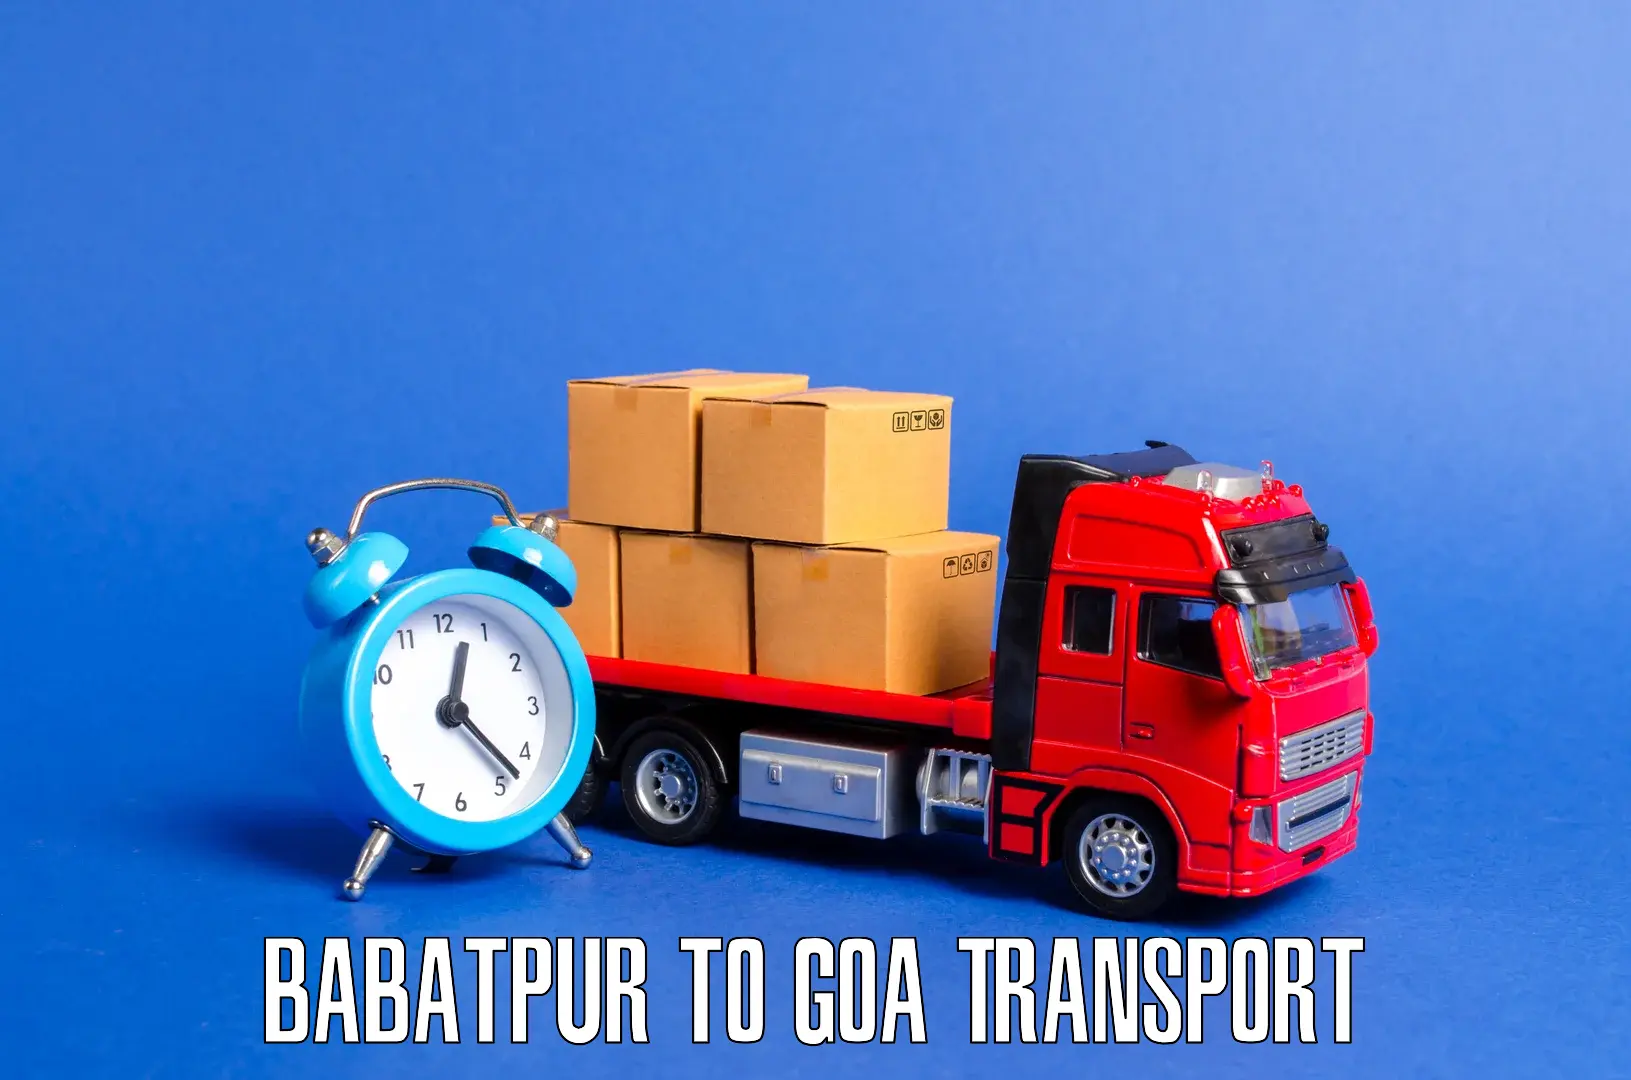 Transport shared services Babatpur to Panaji